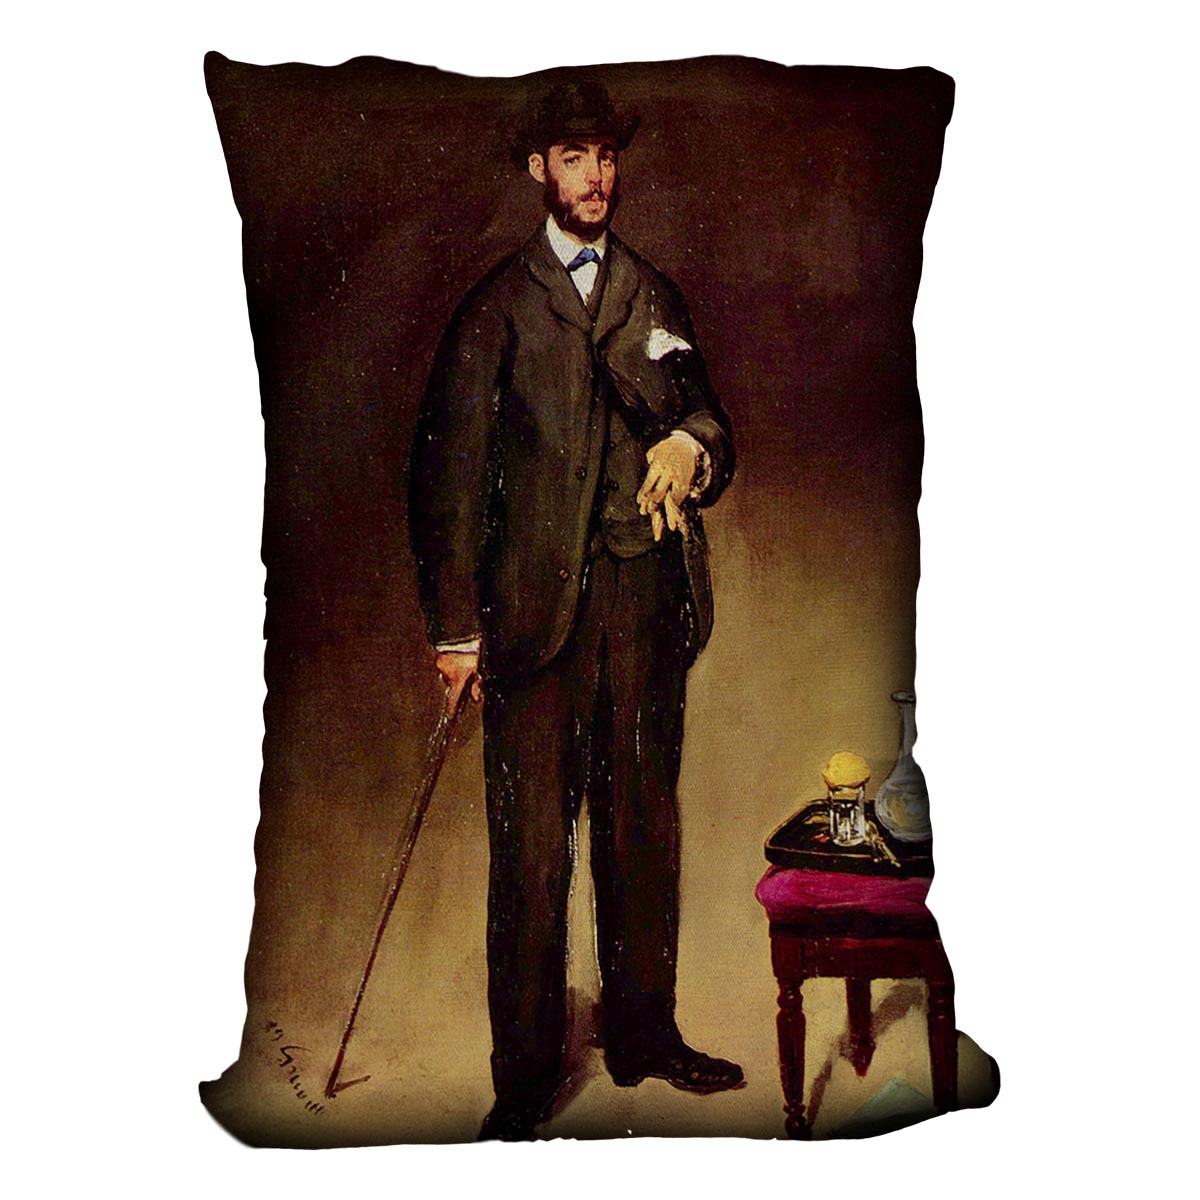 Portrait of ThCodore Duret by Manet Cushion